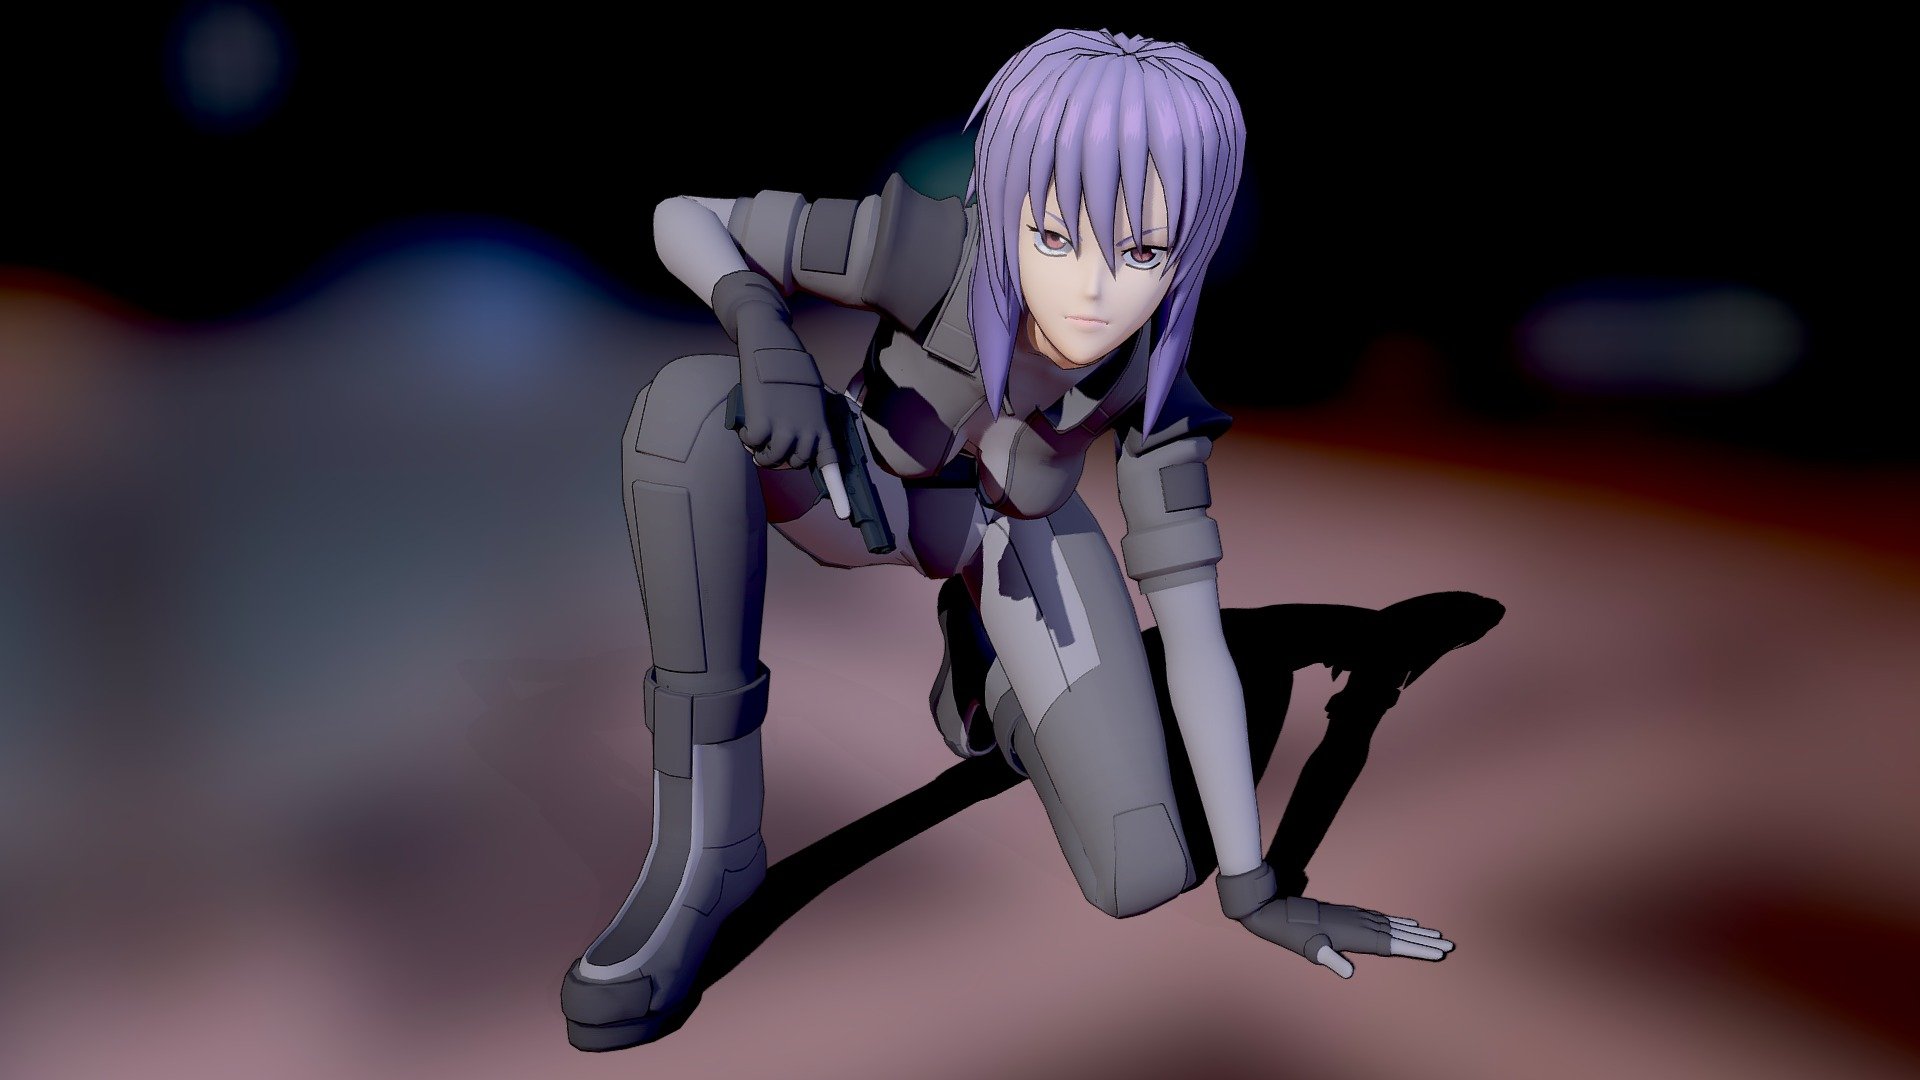 From the Anime show Ghost in the Shell: Stand Alone Complex. 33.6 tris and 2 mats with 1 diffuse texture each. Includes zip file with rigged FBX and Unitypackage for Vrchat.  VRC package will need https://gitlab.com/s-ilent/SCSS 3d model